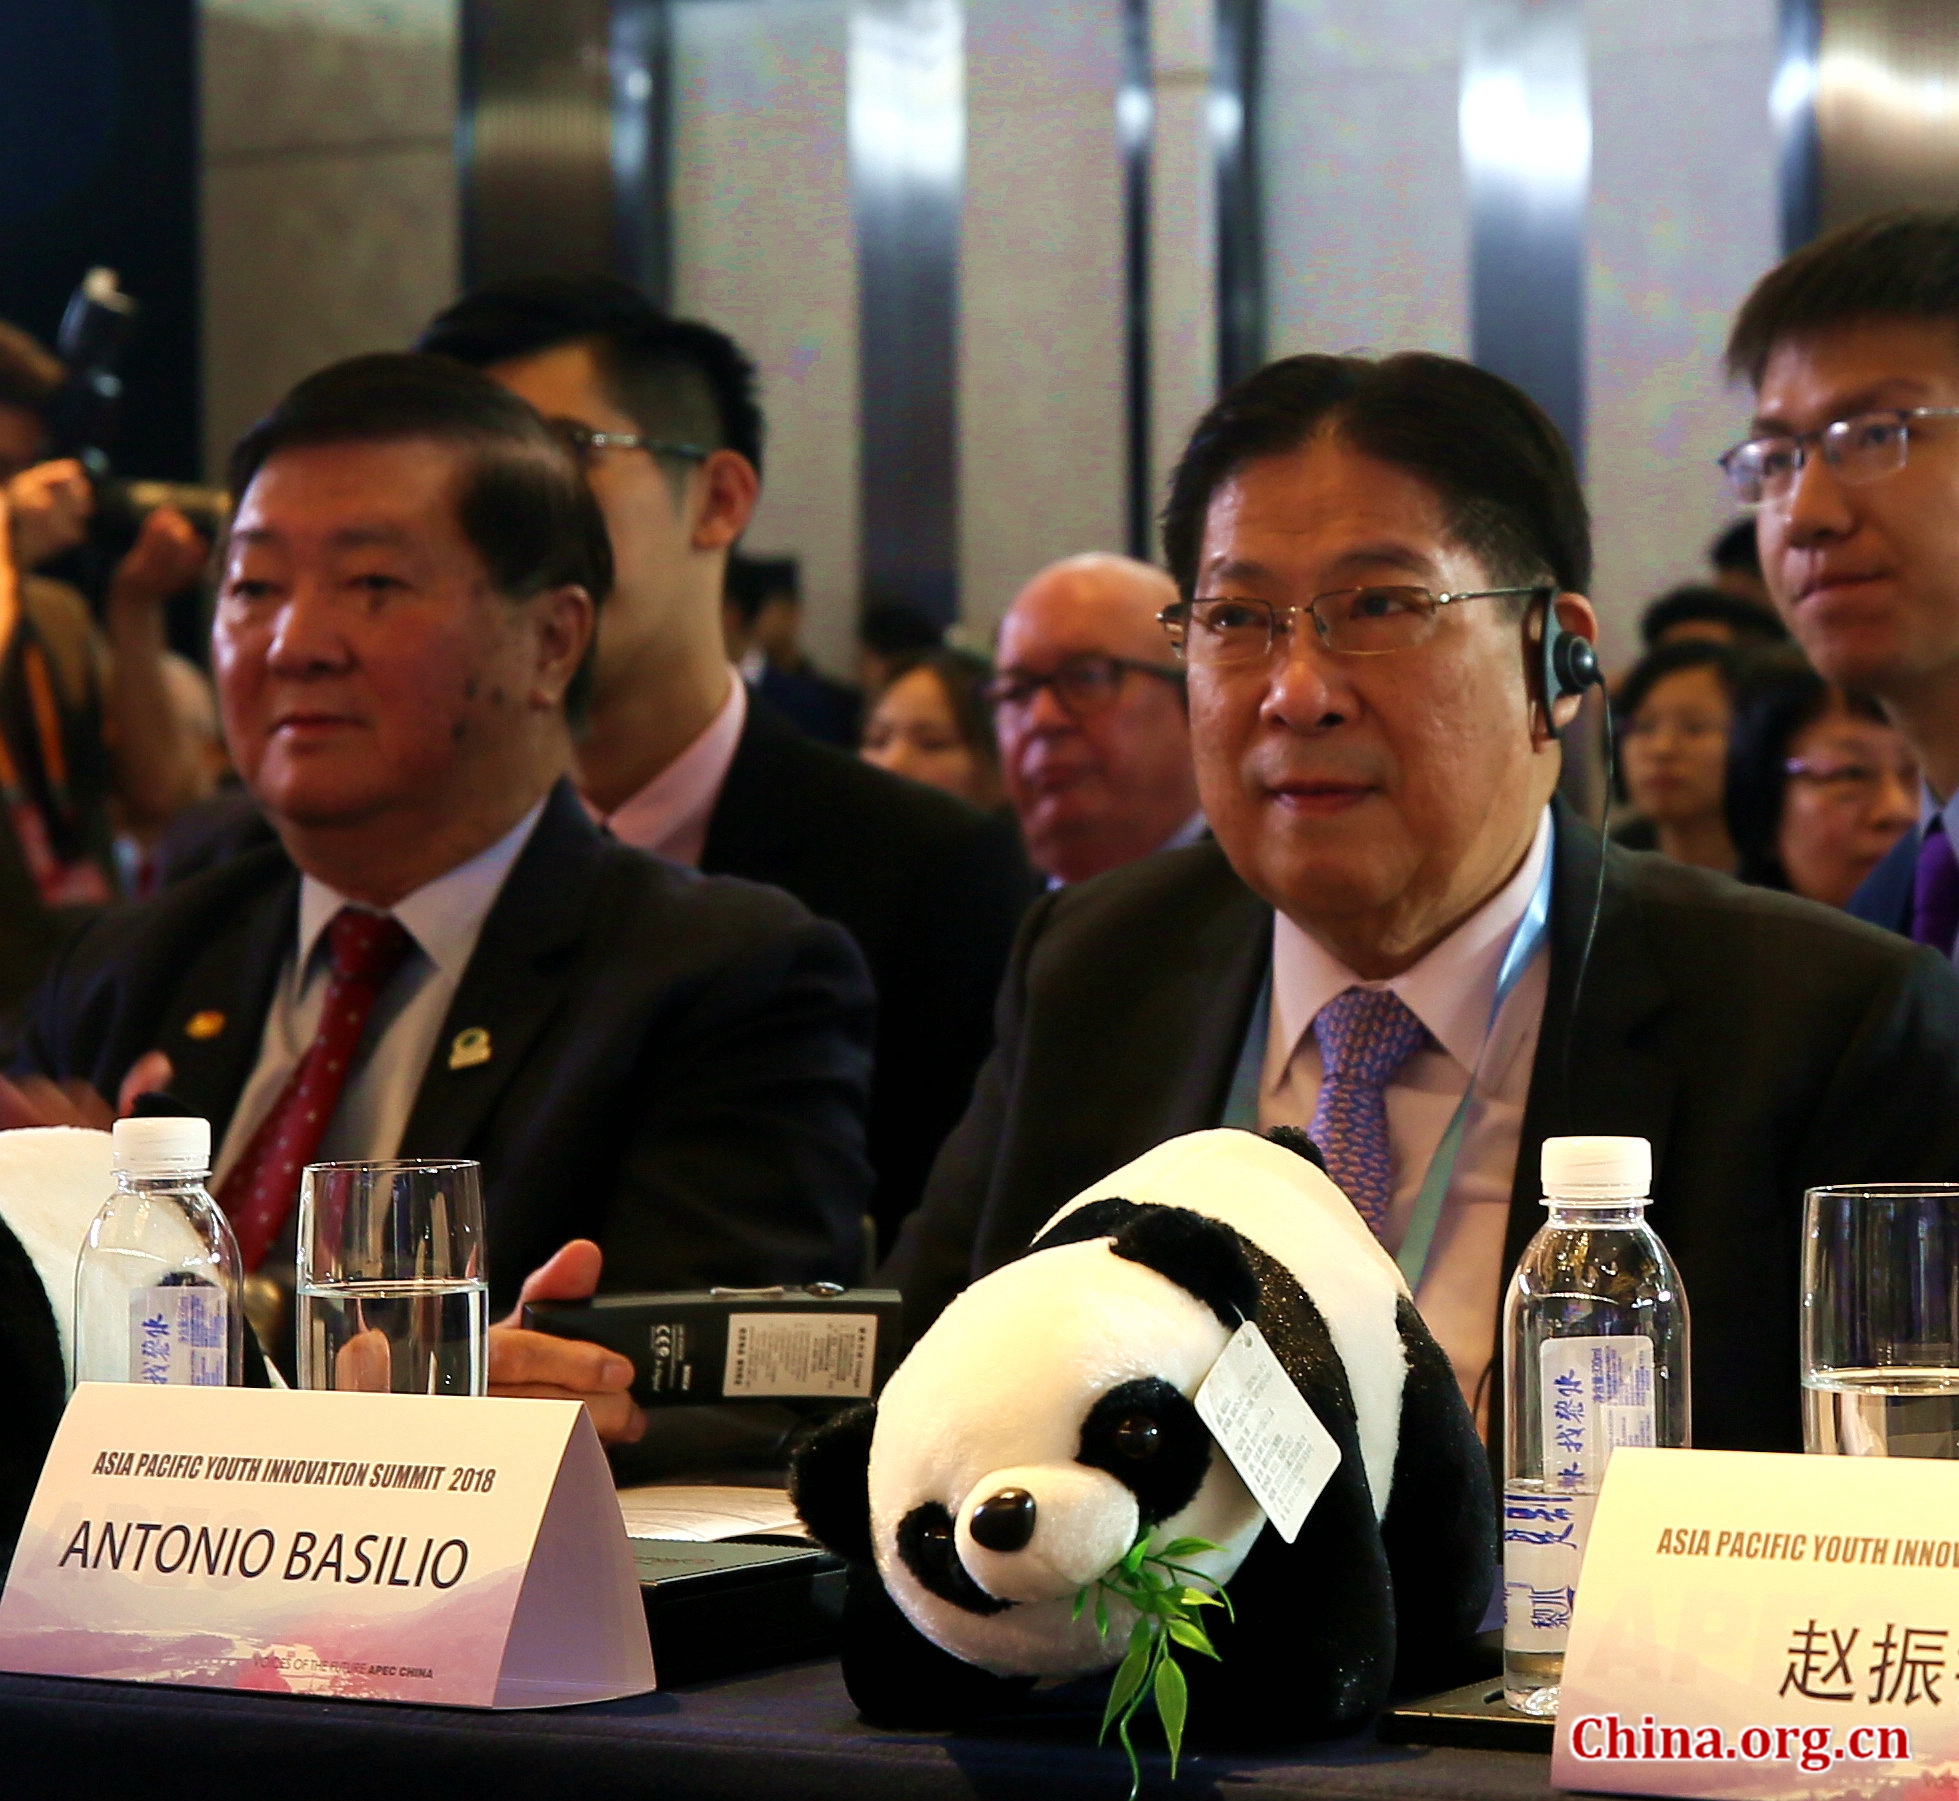 Antonio Basilio, executive director of the International Secretariat of the APEC Business Advisory Council, attends the opening ceremony of the APEC Youth Innovation Summit 2018 on August 23 in Chengdu. [Photo by Li Huiru / China.org.cn]